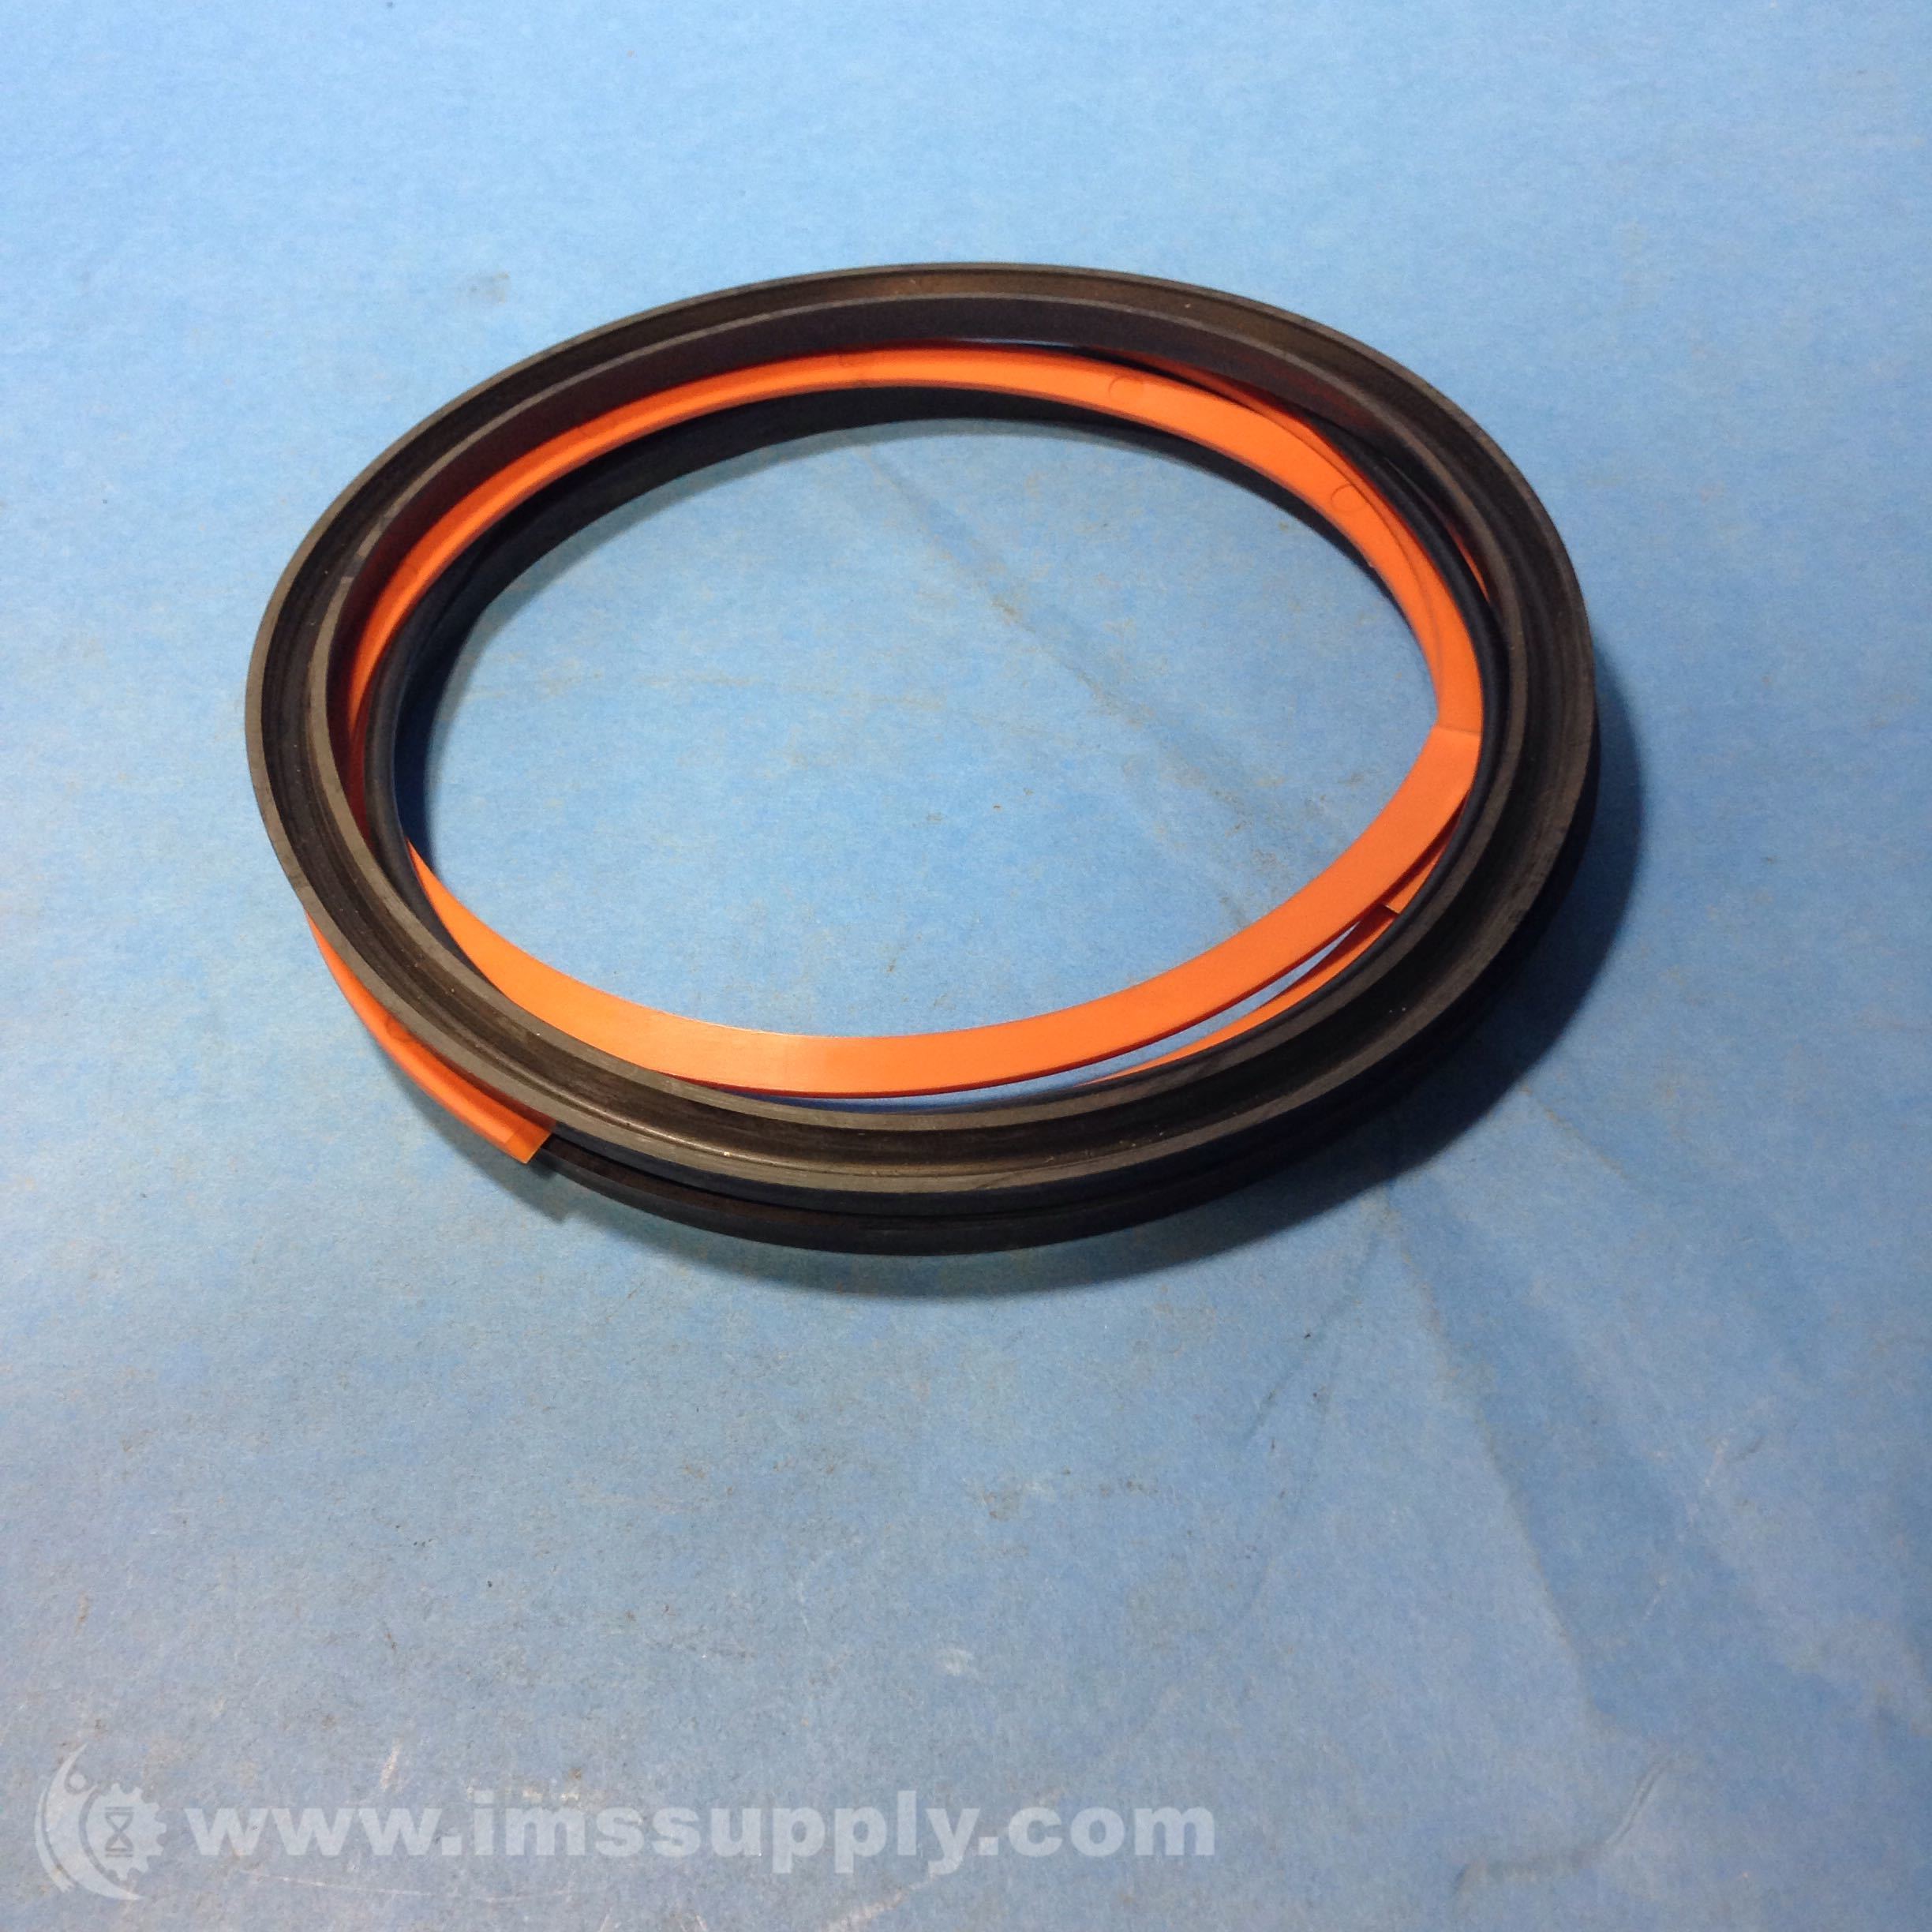 Details about   NEW MSC PH-PK602HLL01 SEAL KIT 